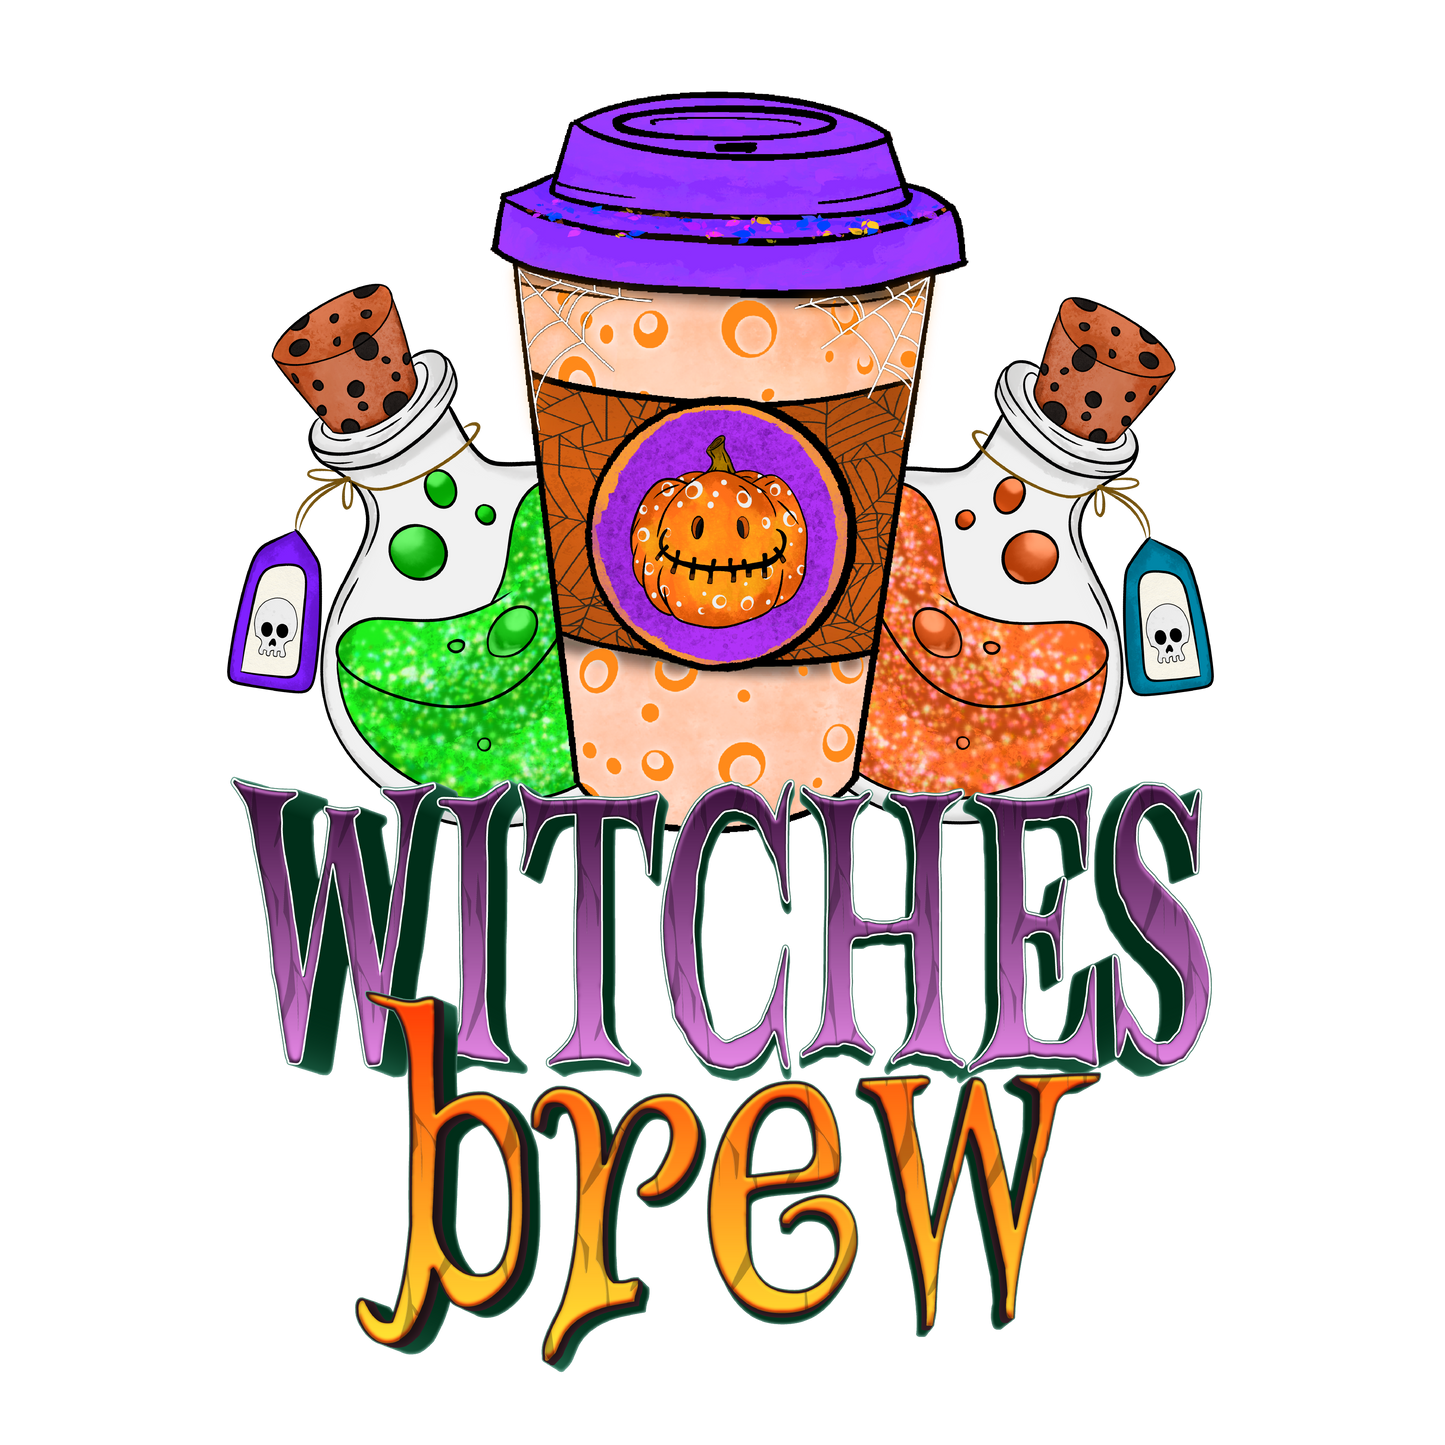 WITCHES BREW